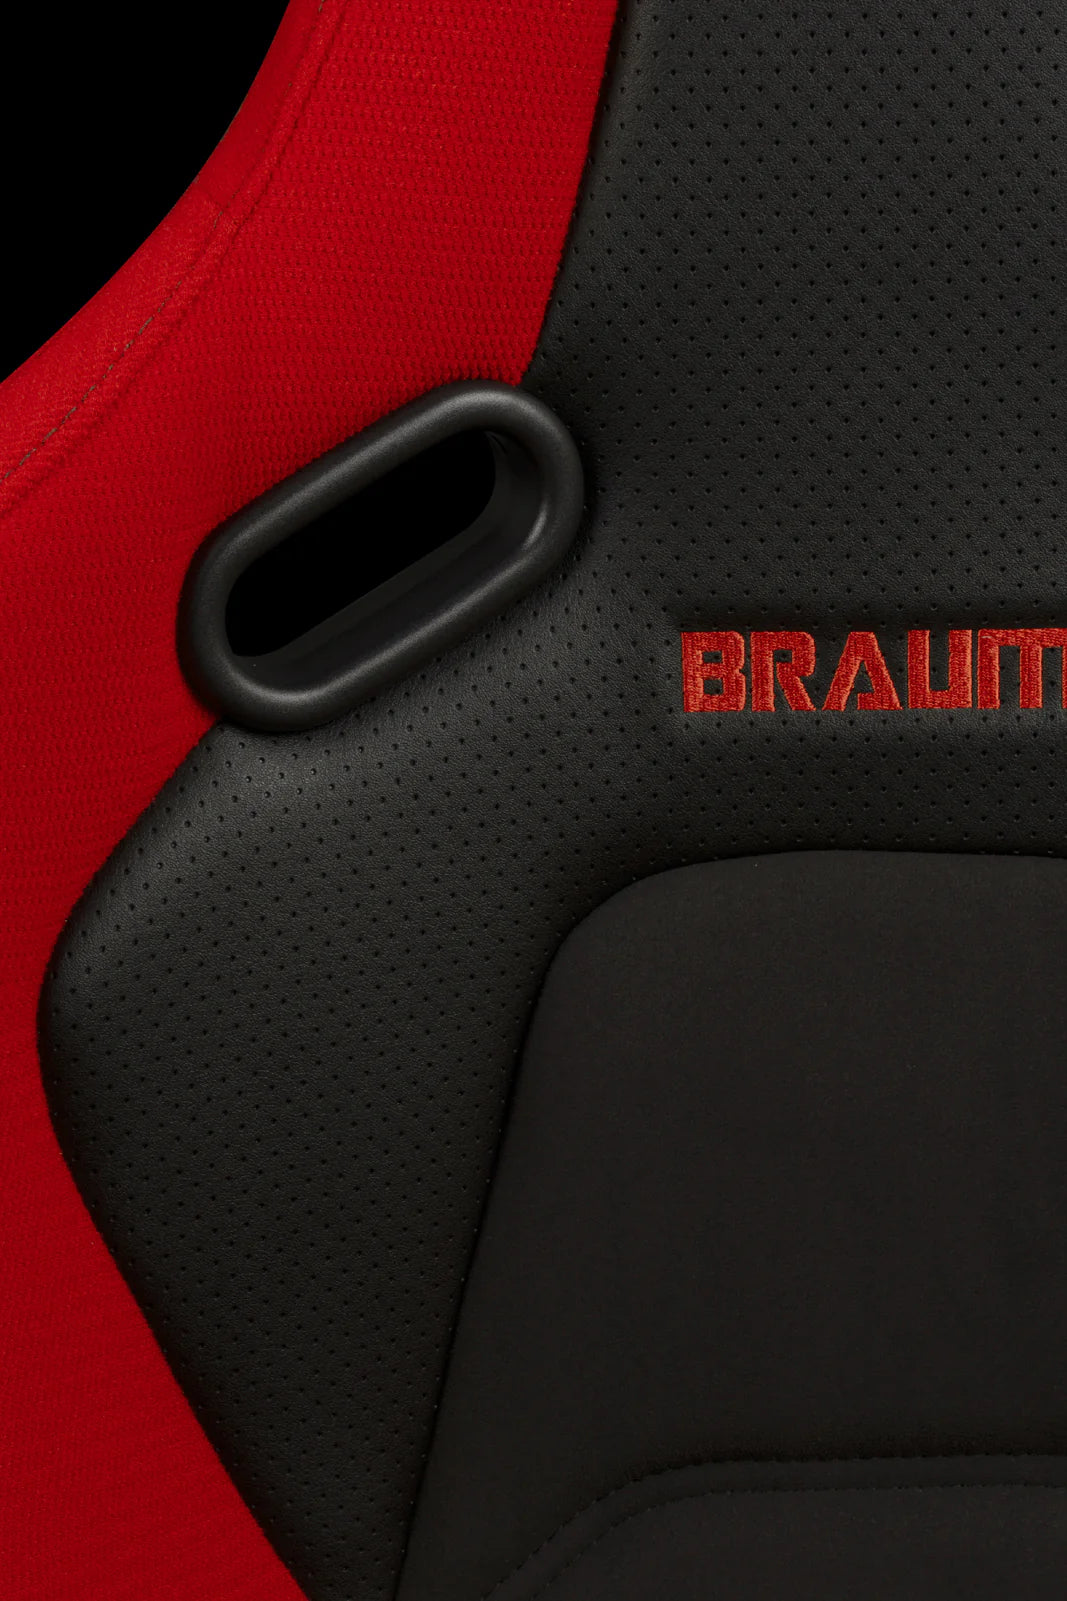 BRAUM FALCON-S Series Fixed Back Bucket Composite Seat (Red Cloth | Alcantara Inserts | Black Stitching) - Priced Per Seat